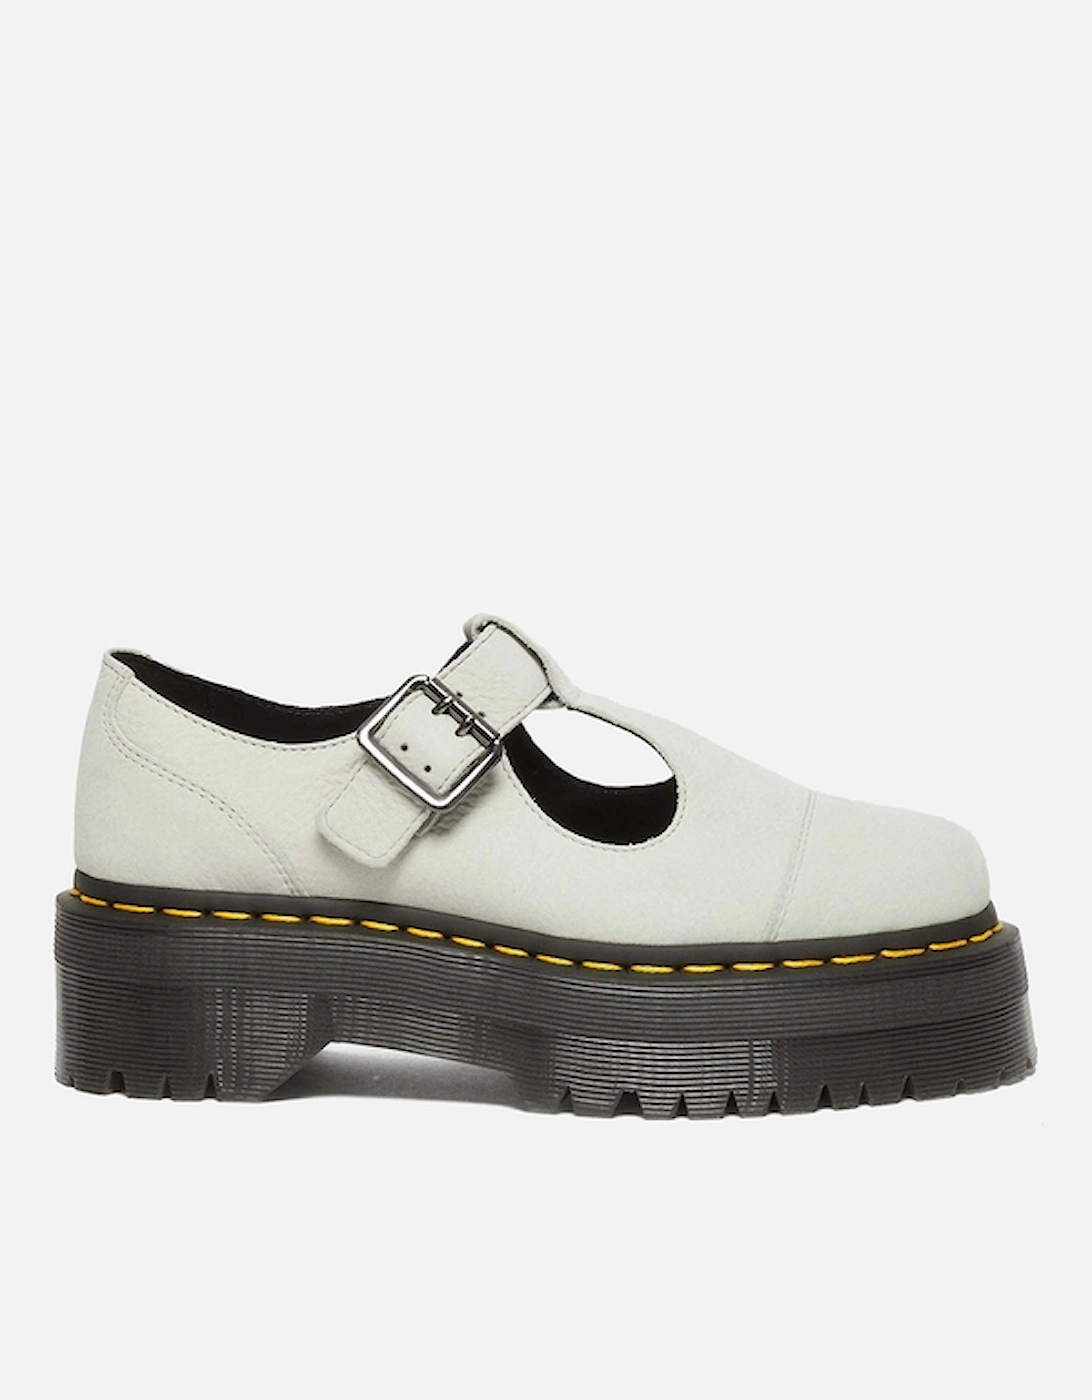 Dr. Martens Women's Bethan Leather Quad Mary-Jane Shoes - Smoked Mint, 2 of 1